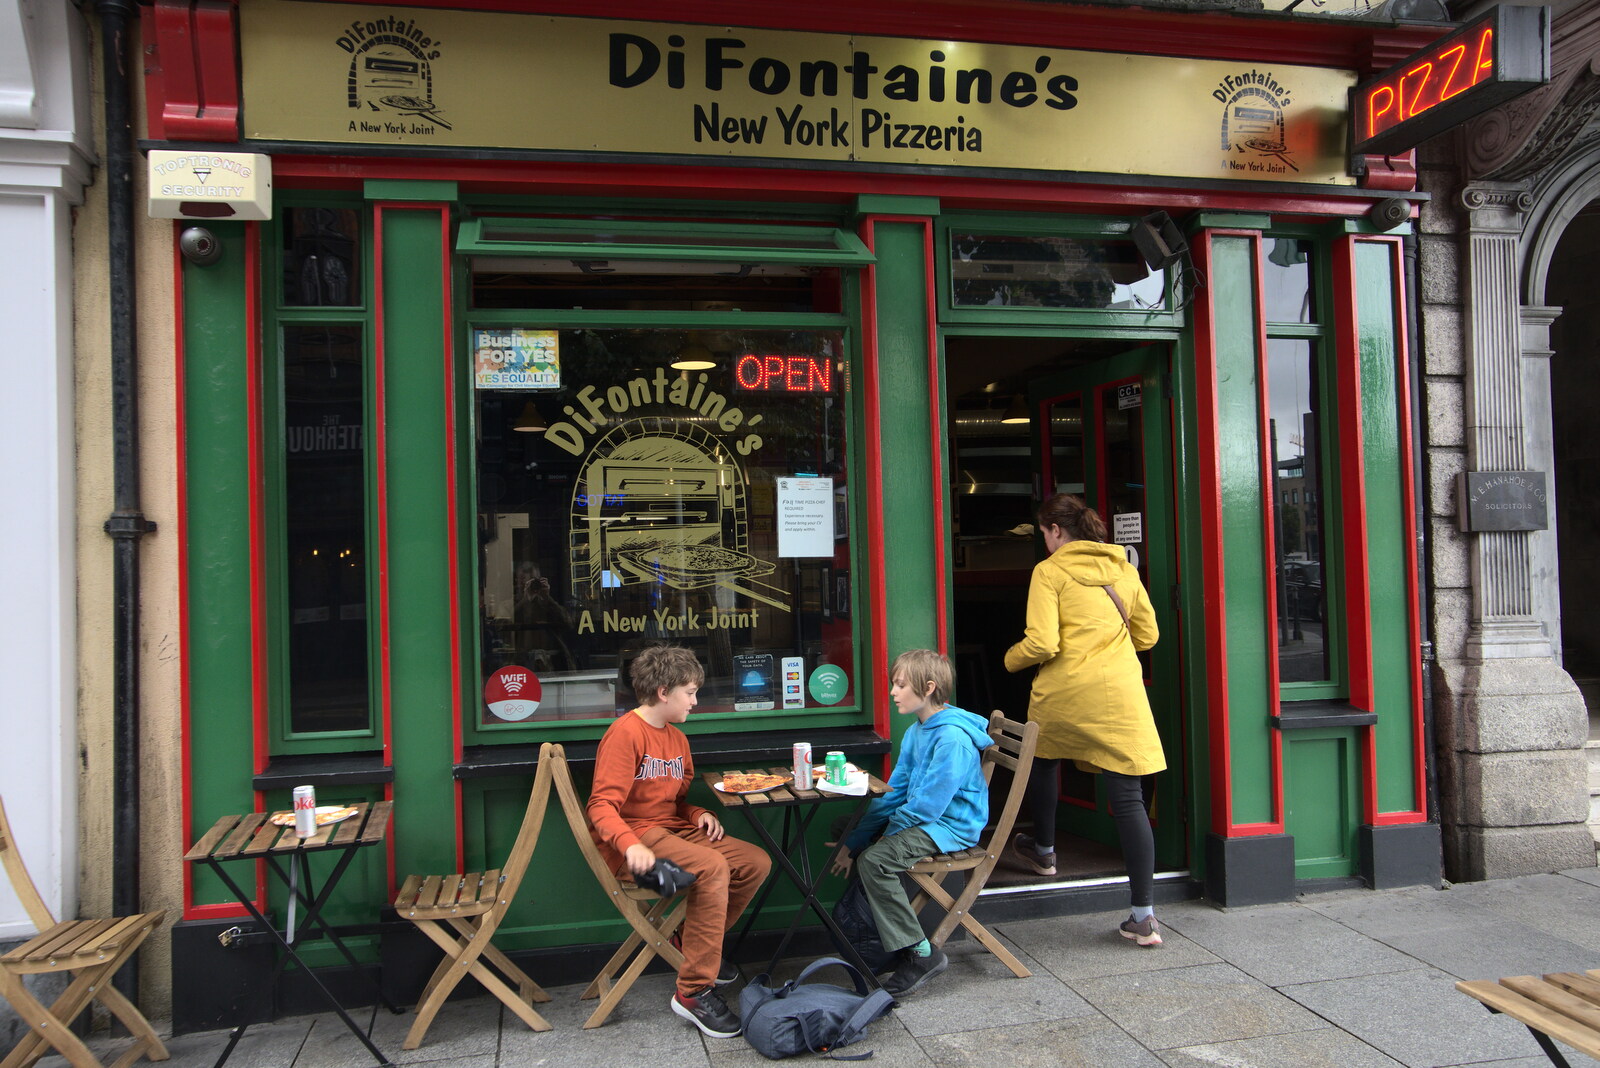 DiFontaine's - a New York Joint from A Trip to Noddy's, and Dublin City Centre, Wicklow and Dublin, Ireland - 16th August 2021